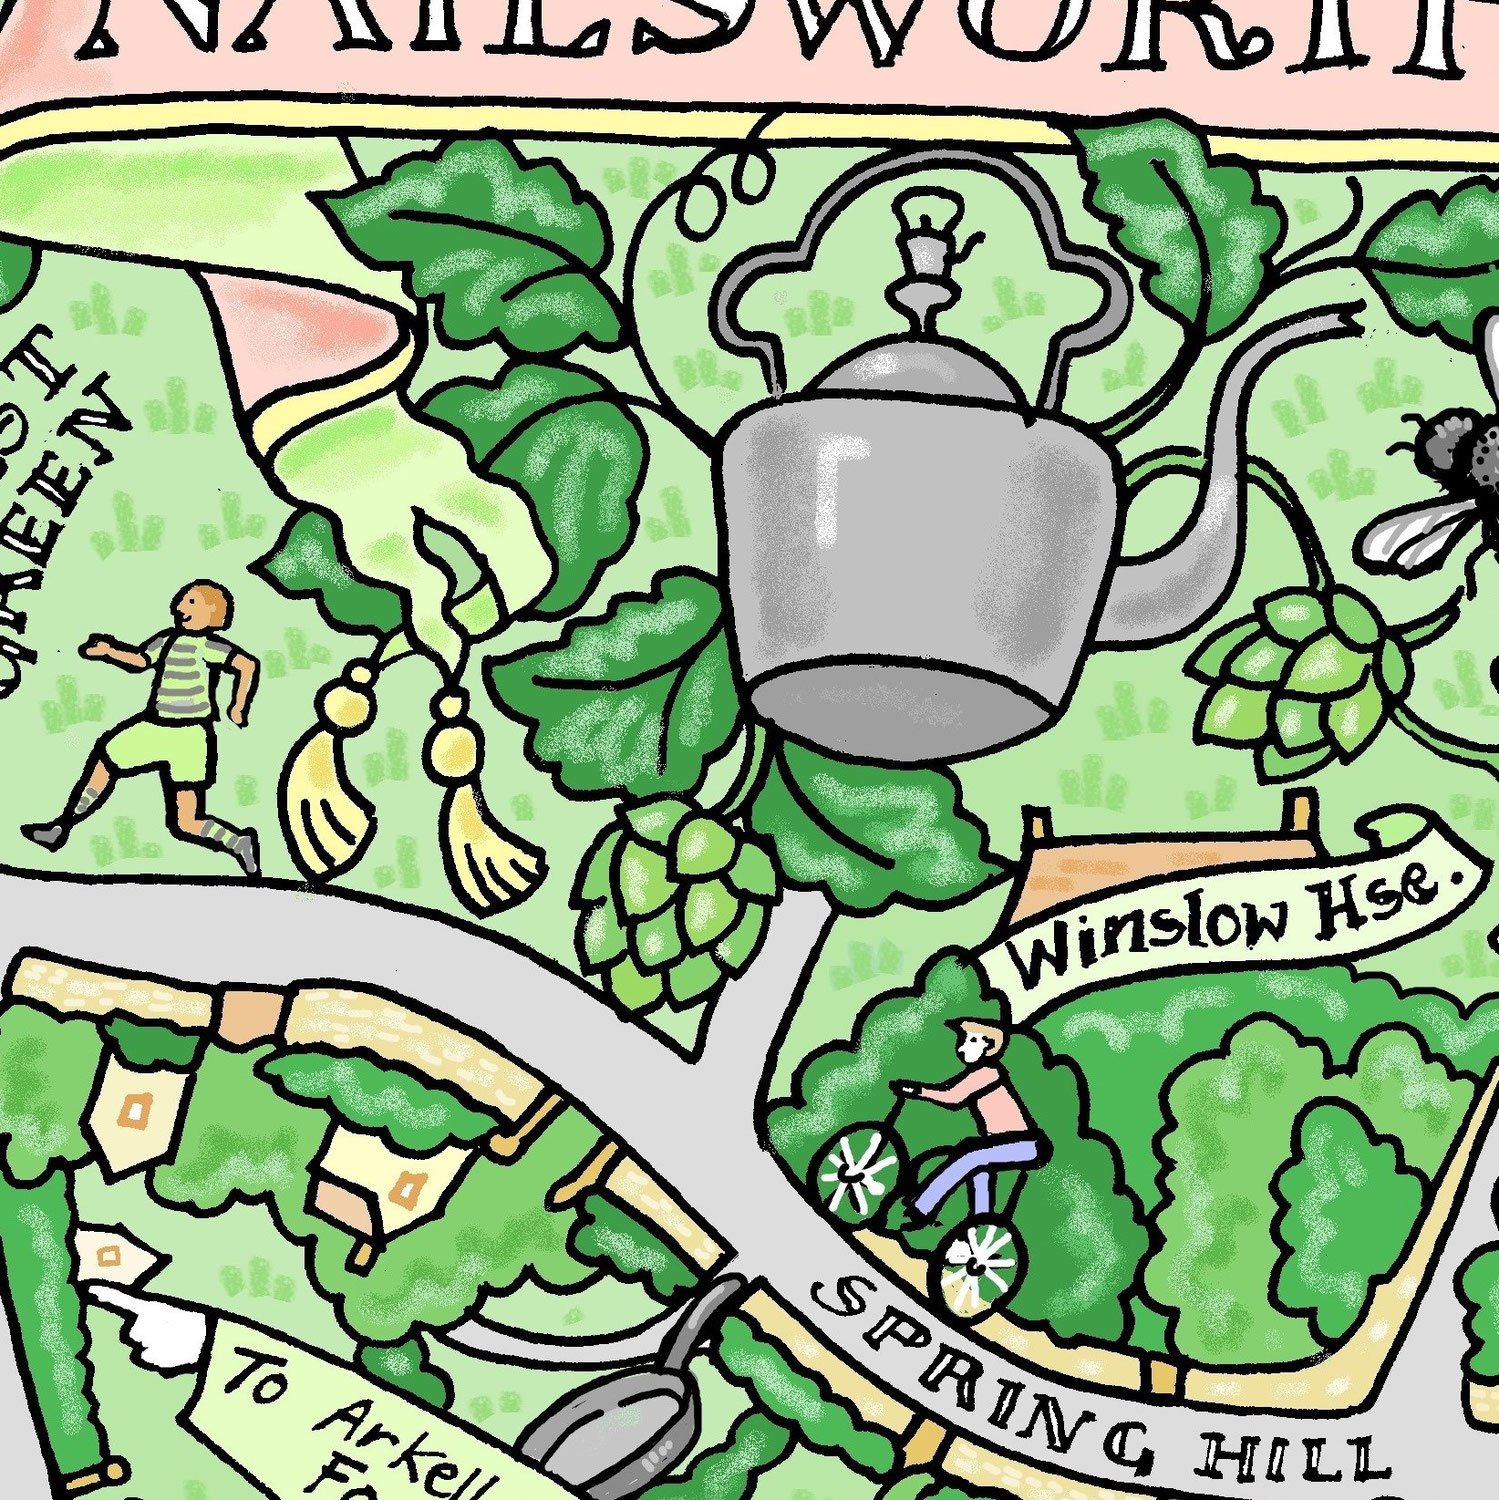 Nailsworth- Illustrated map